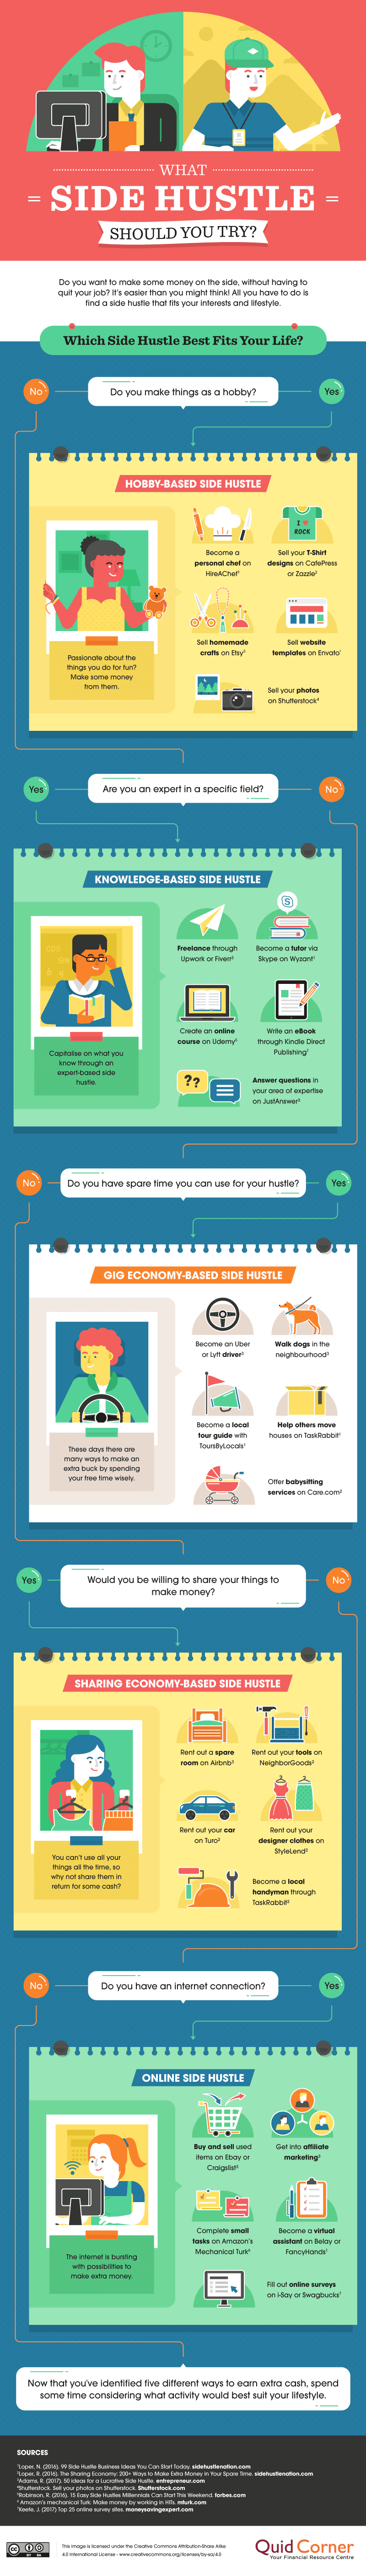 The Side Hustle Economy: 25 Ways to Make Extra Dough #[infographic]